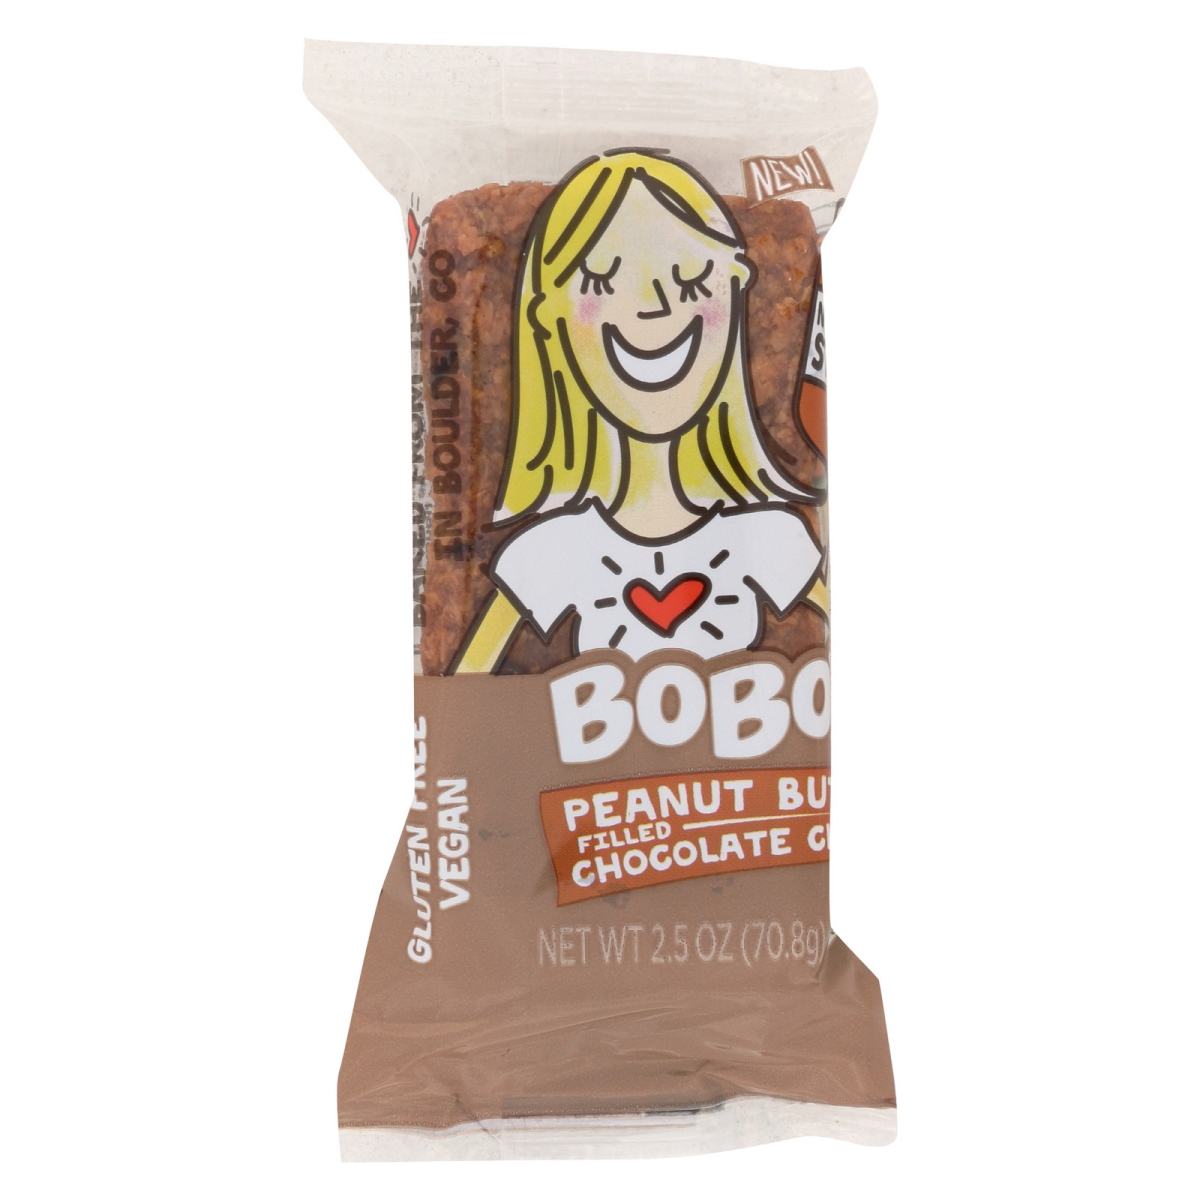 Picture of Bobos Oat Bars 2060408 2.5 oz Peanut Butter Filled Chocolate Chip Oat Bar 